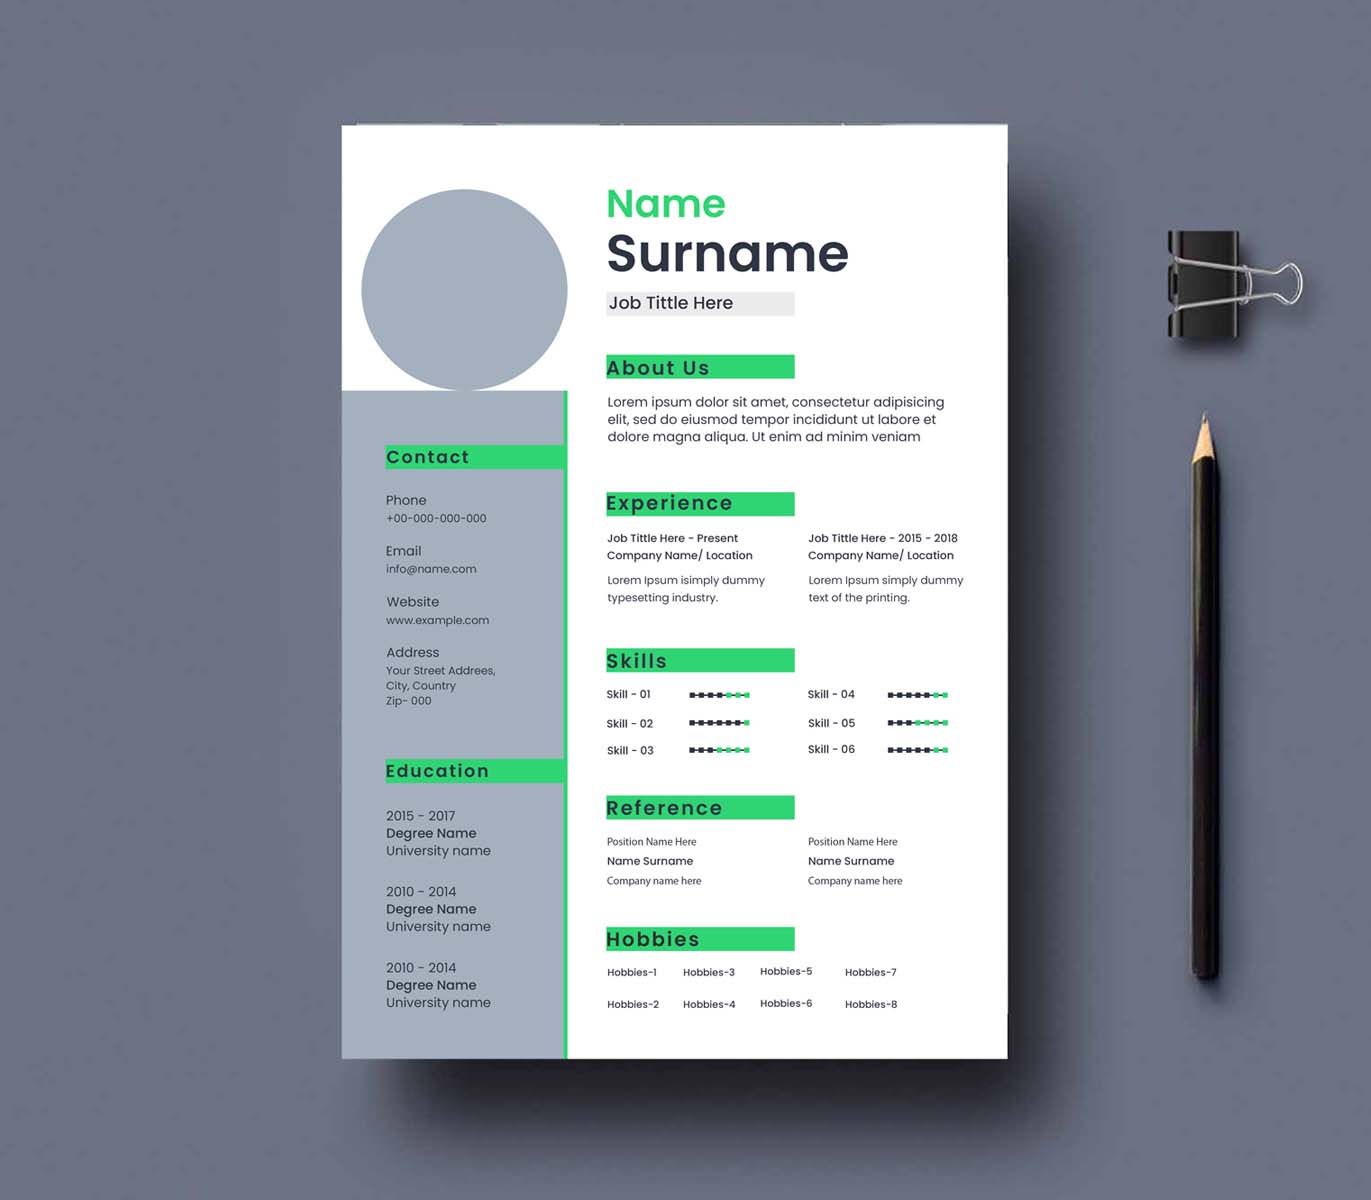 Clean and modern resume template with green accents.